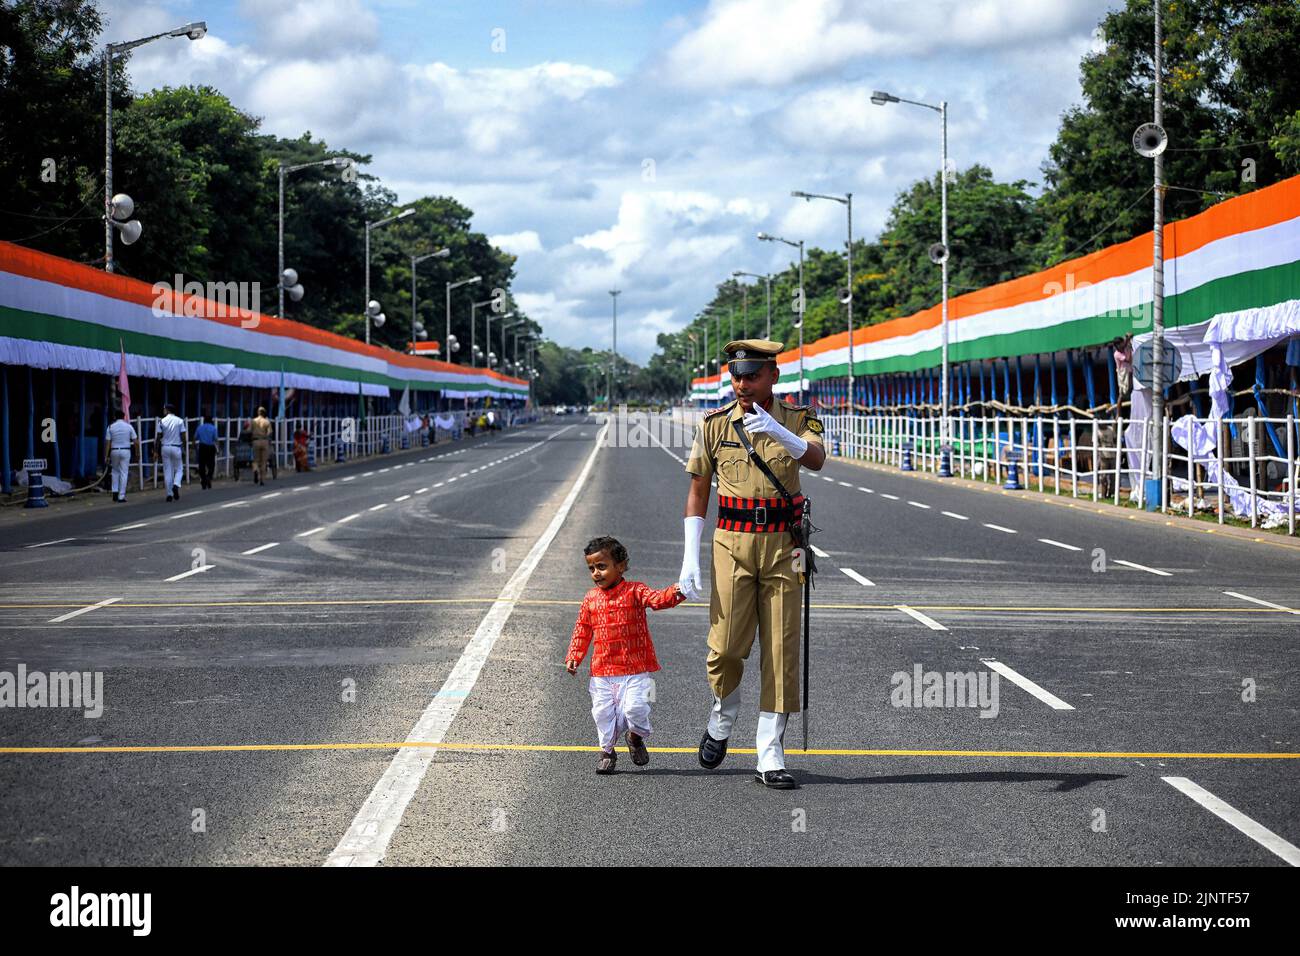 A little child seen with his father who is part of the Kolkata police armed force during the Independence day Final Dress Rehearsal. India prepares to celebrate the 75th Independence day on 15th August 2022 as part of the Azadi Ka Amrit Mahotsav celebration. Stock Photo